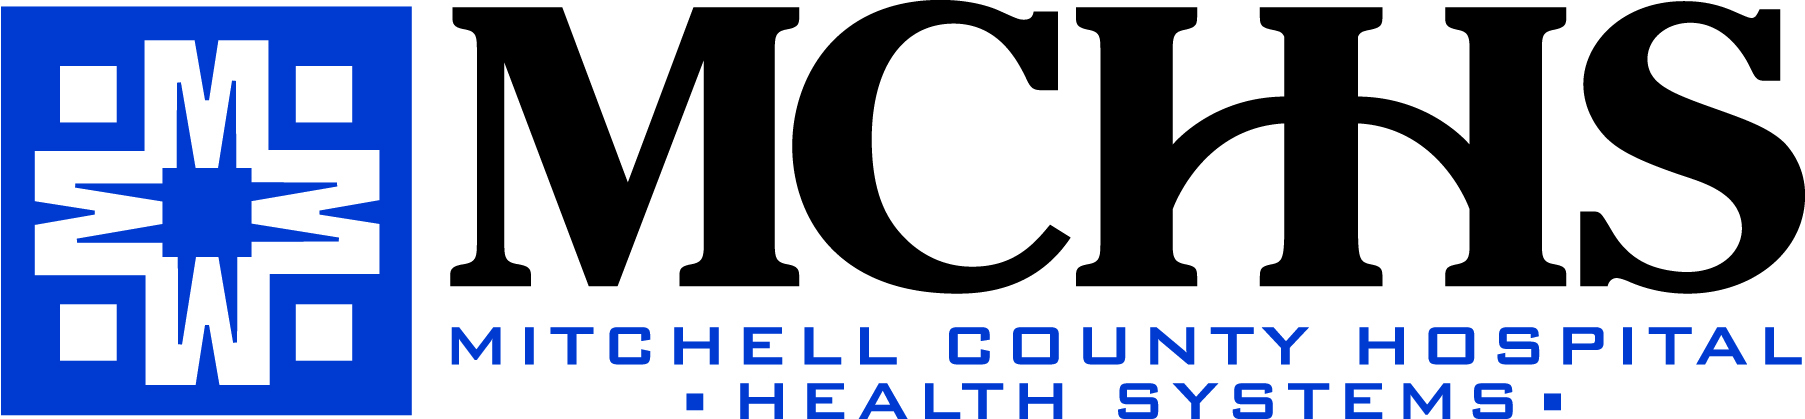 Mitchell County Hospital Health Systems